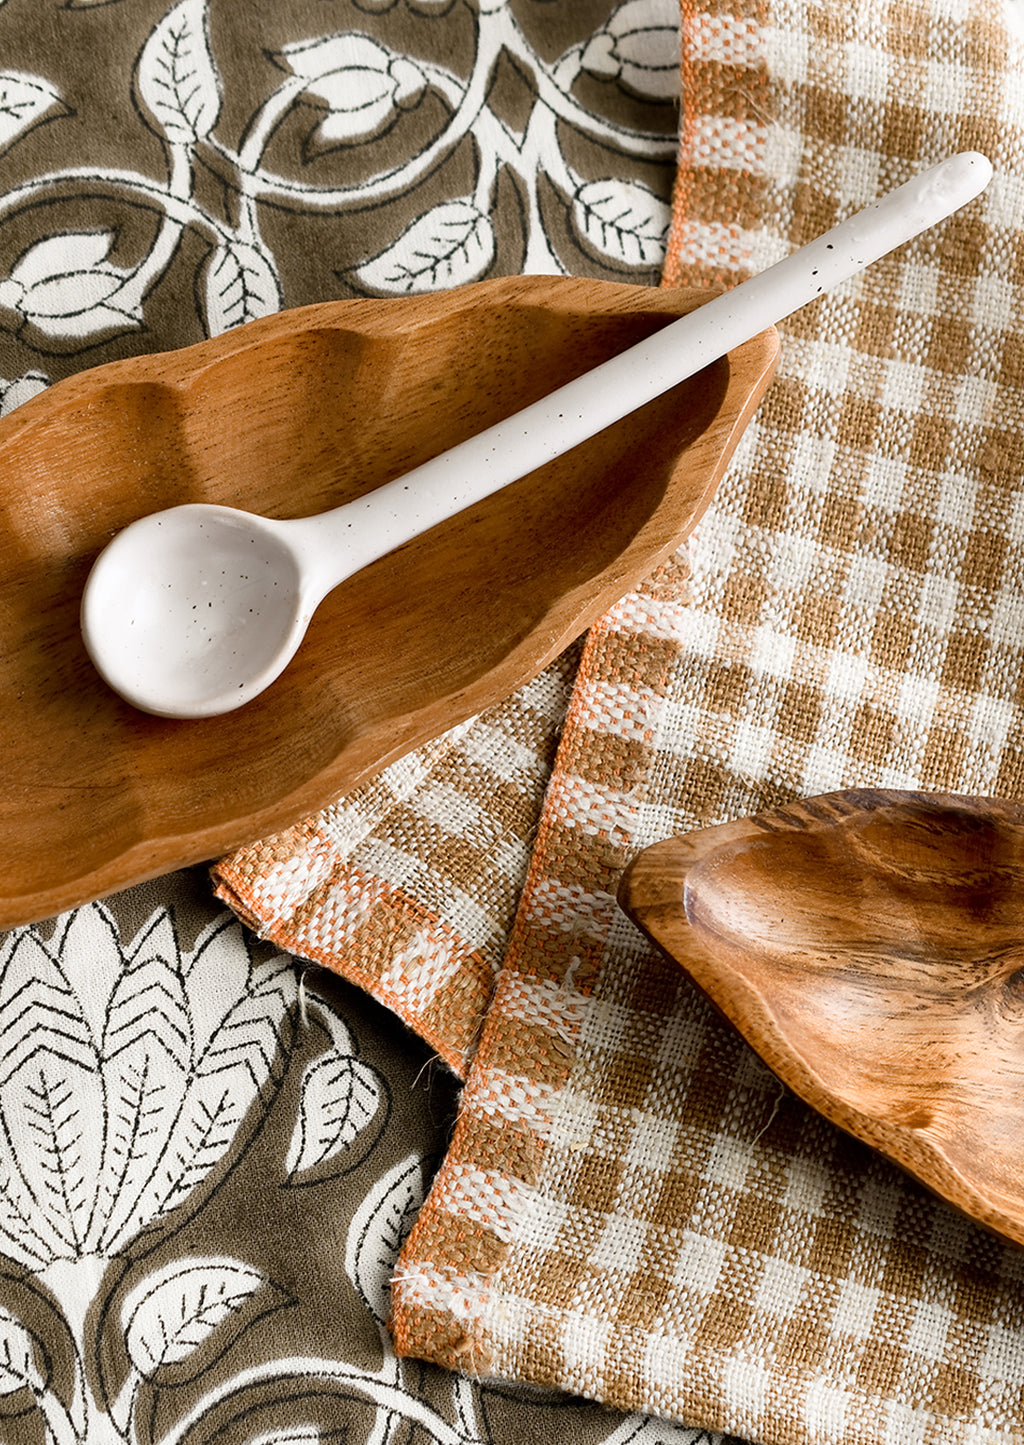 2: Styled scene with spoon, wooden dishes and table textiles.